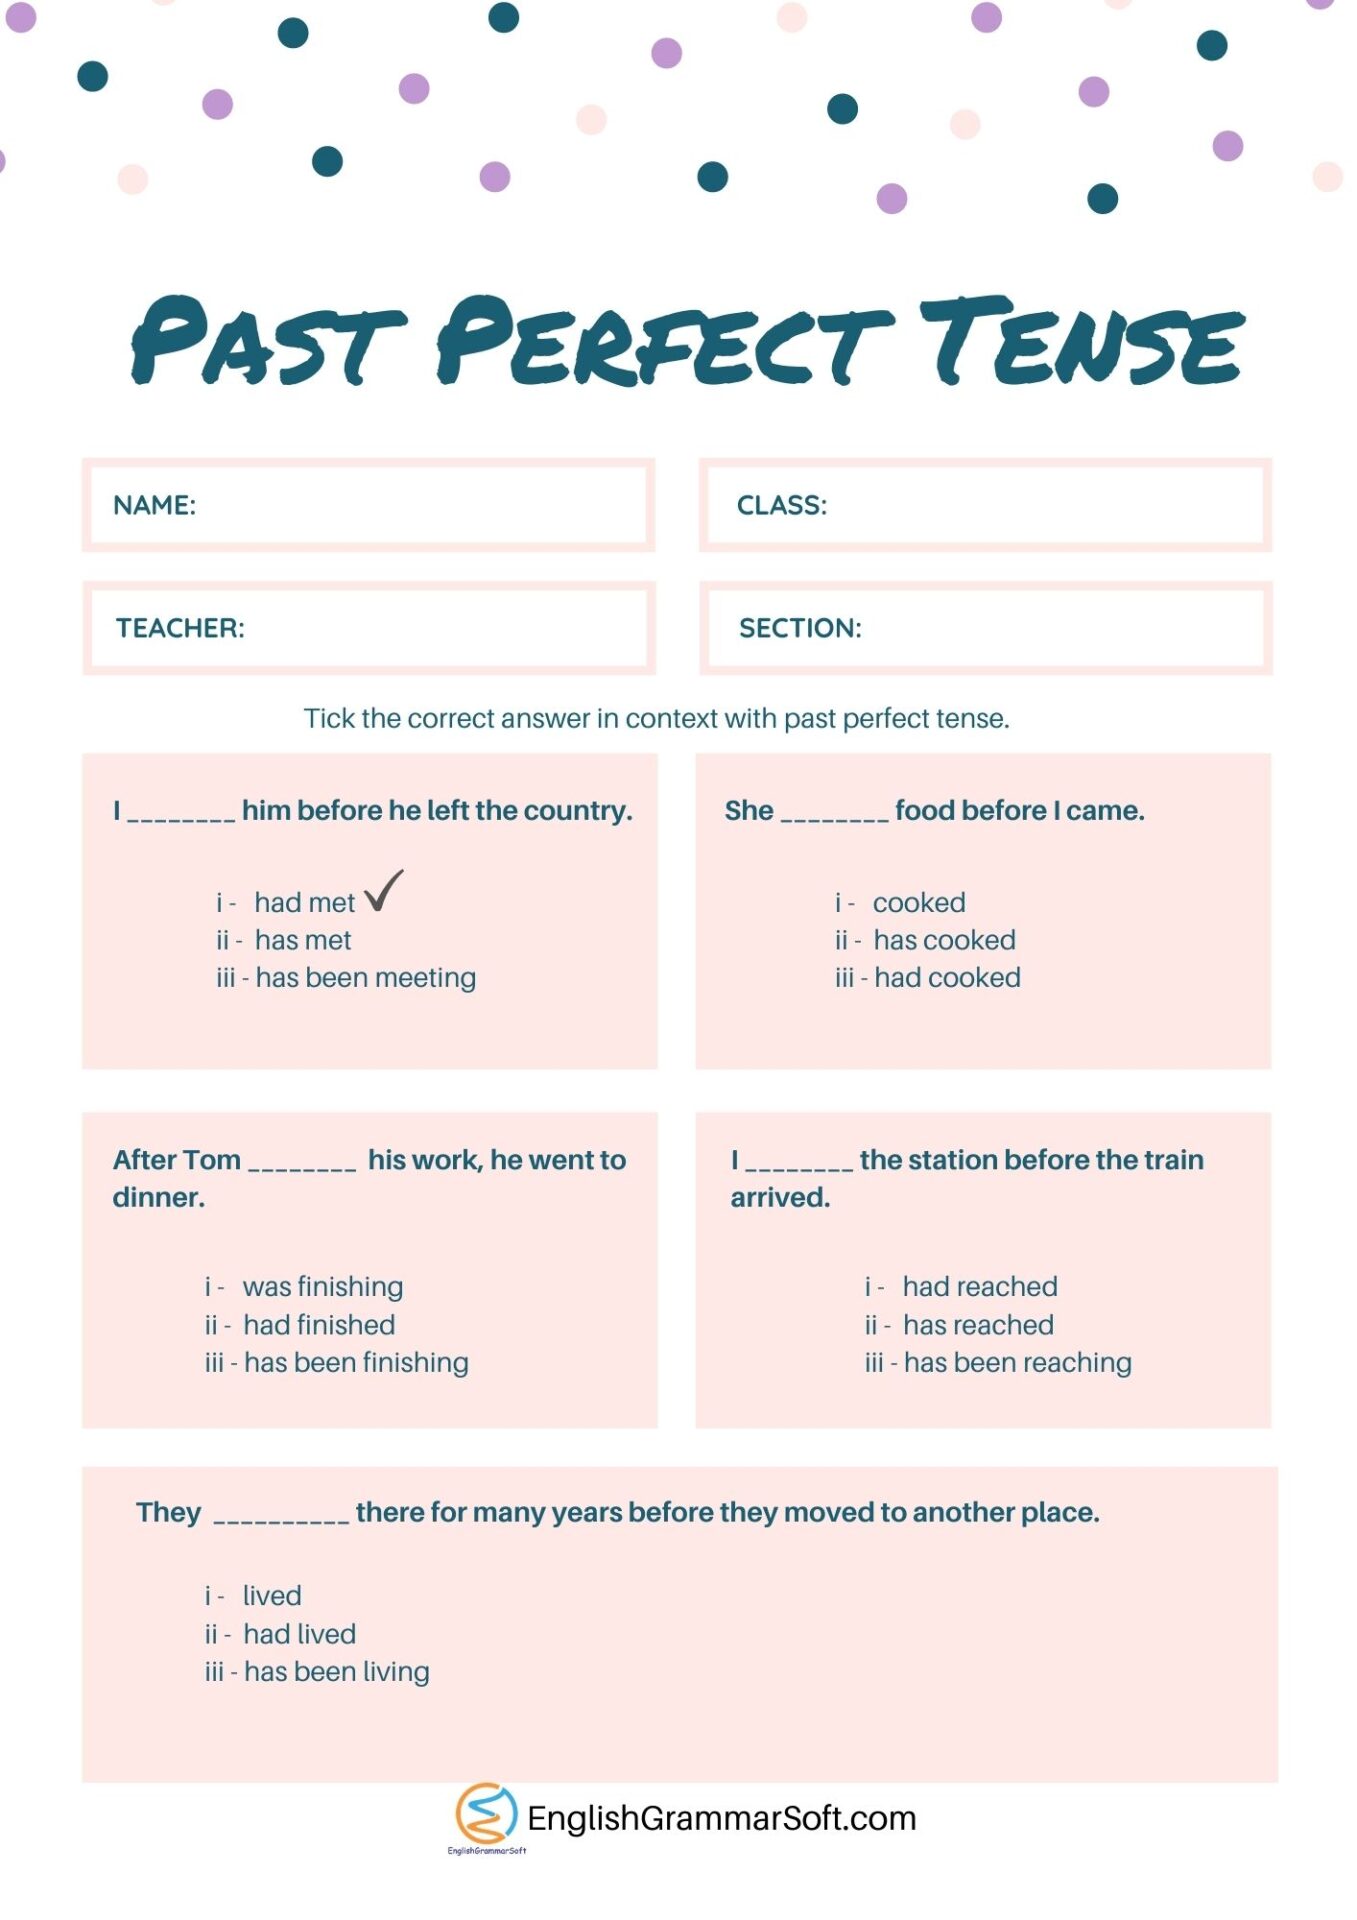 Worksheet For Past Perfect Tense with Answers EnglishGrammarSoft